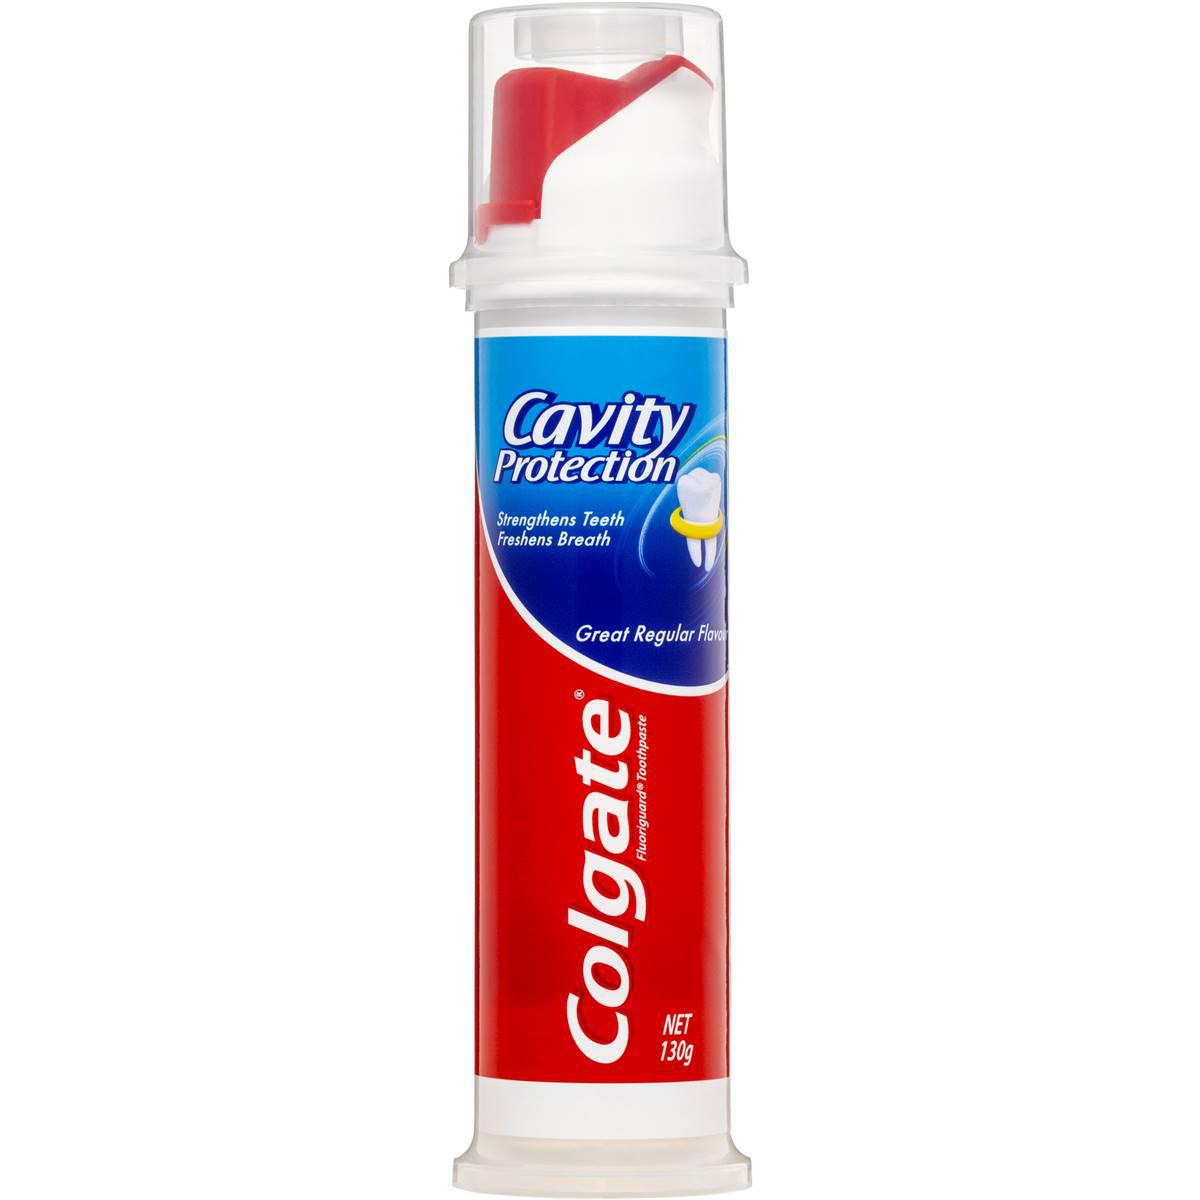 Colgate Cavity Protection Great Regular Toothpaste Pump 130g